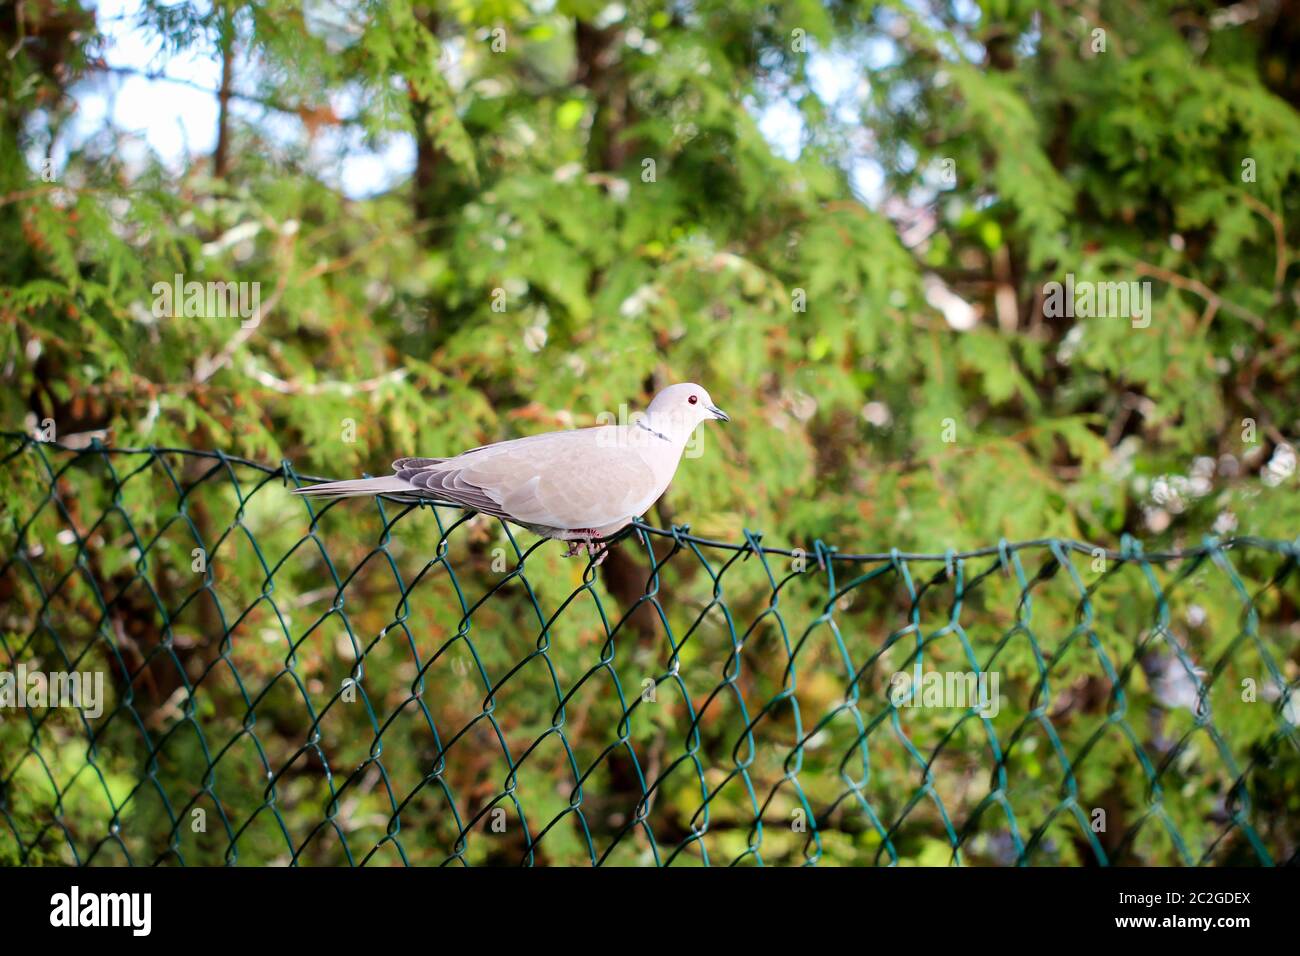 a pigeon sits comfortably on a wire mesh fence Stock Photo